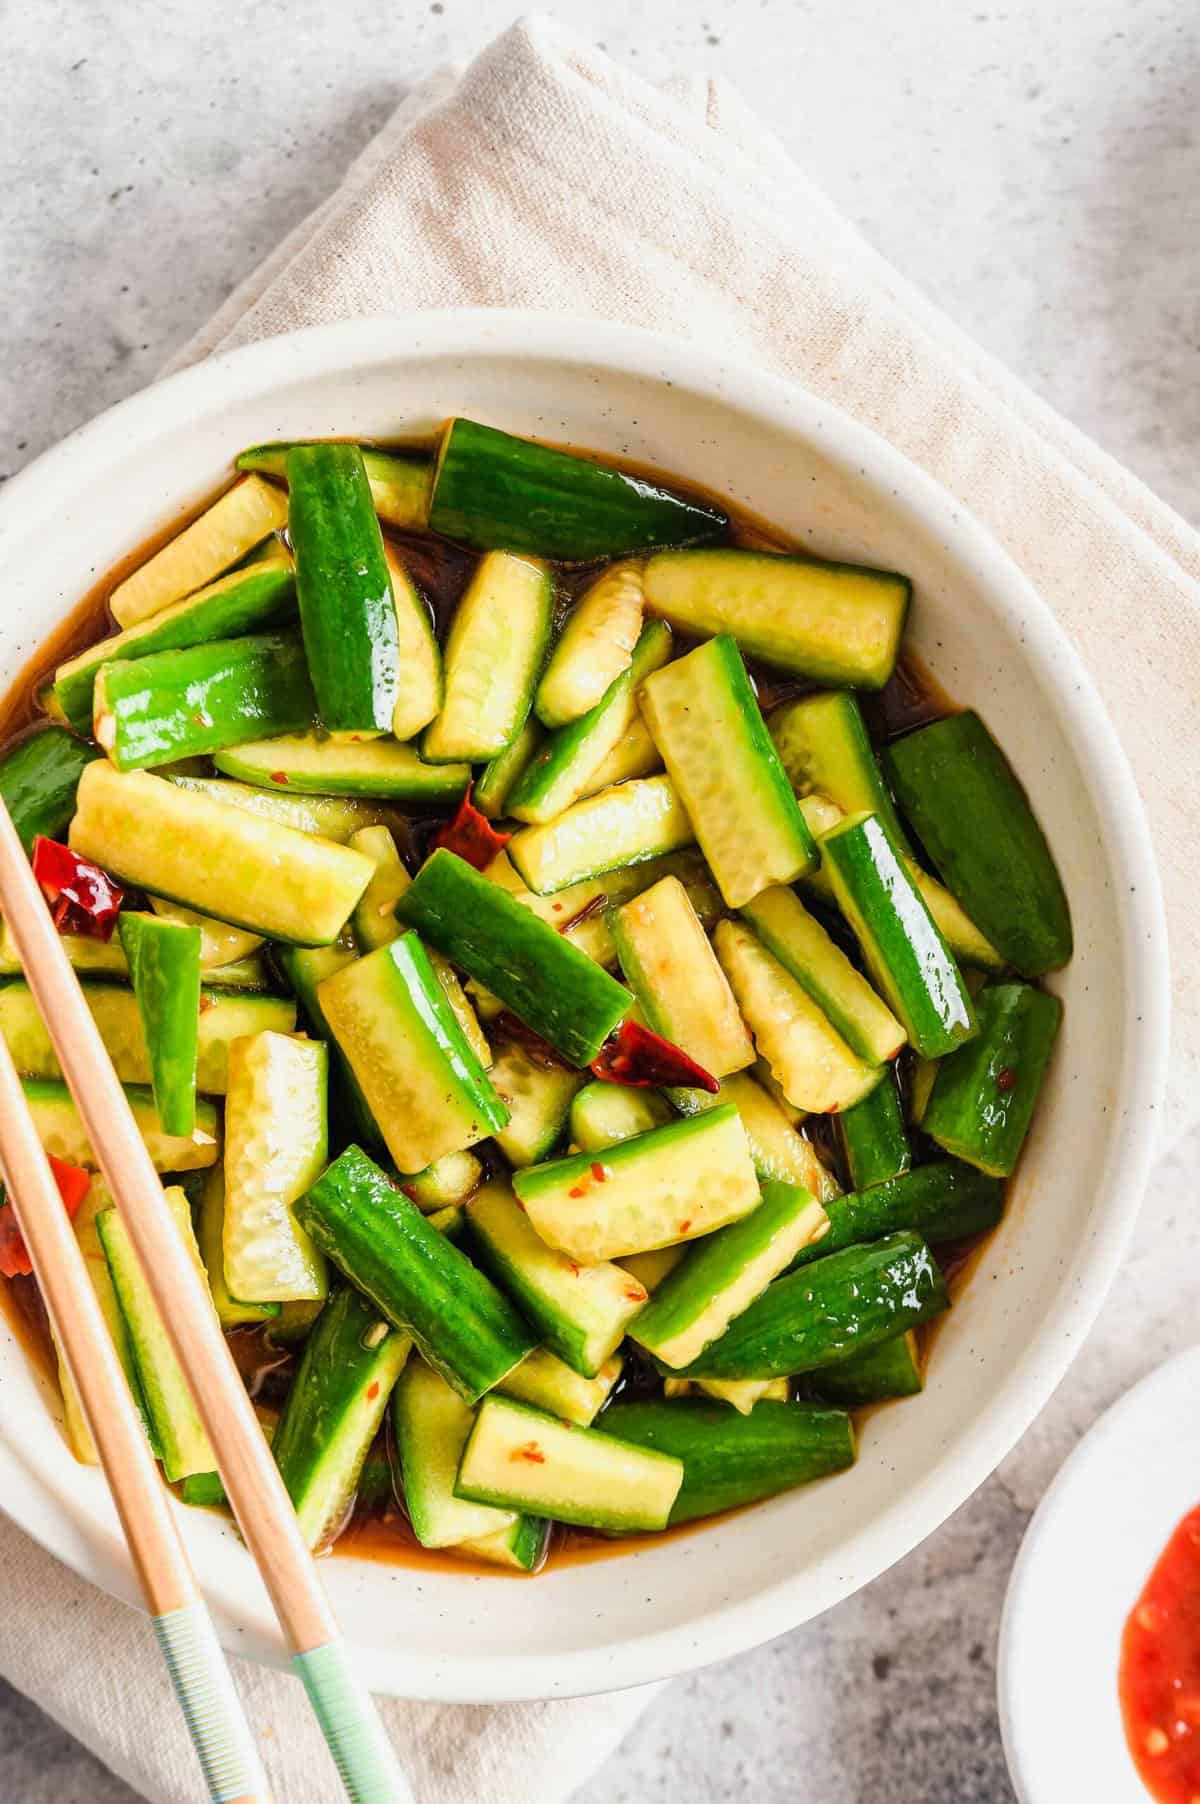 Overhead view of Chinese cucumber salad in white bowl with chopsticks